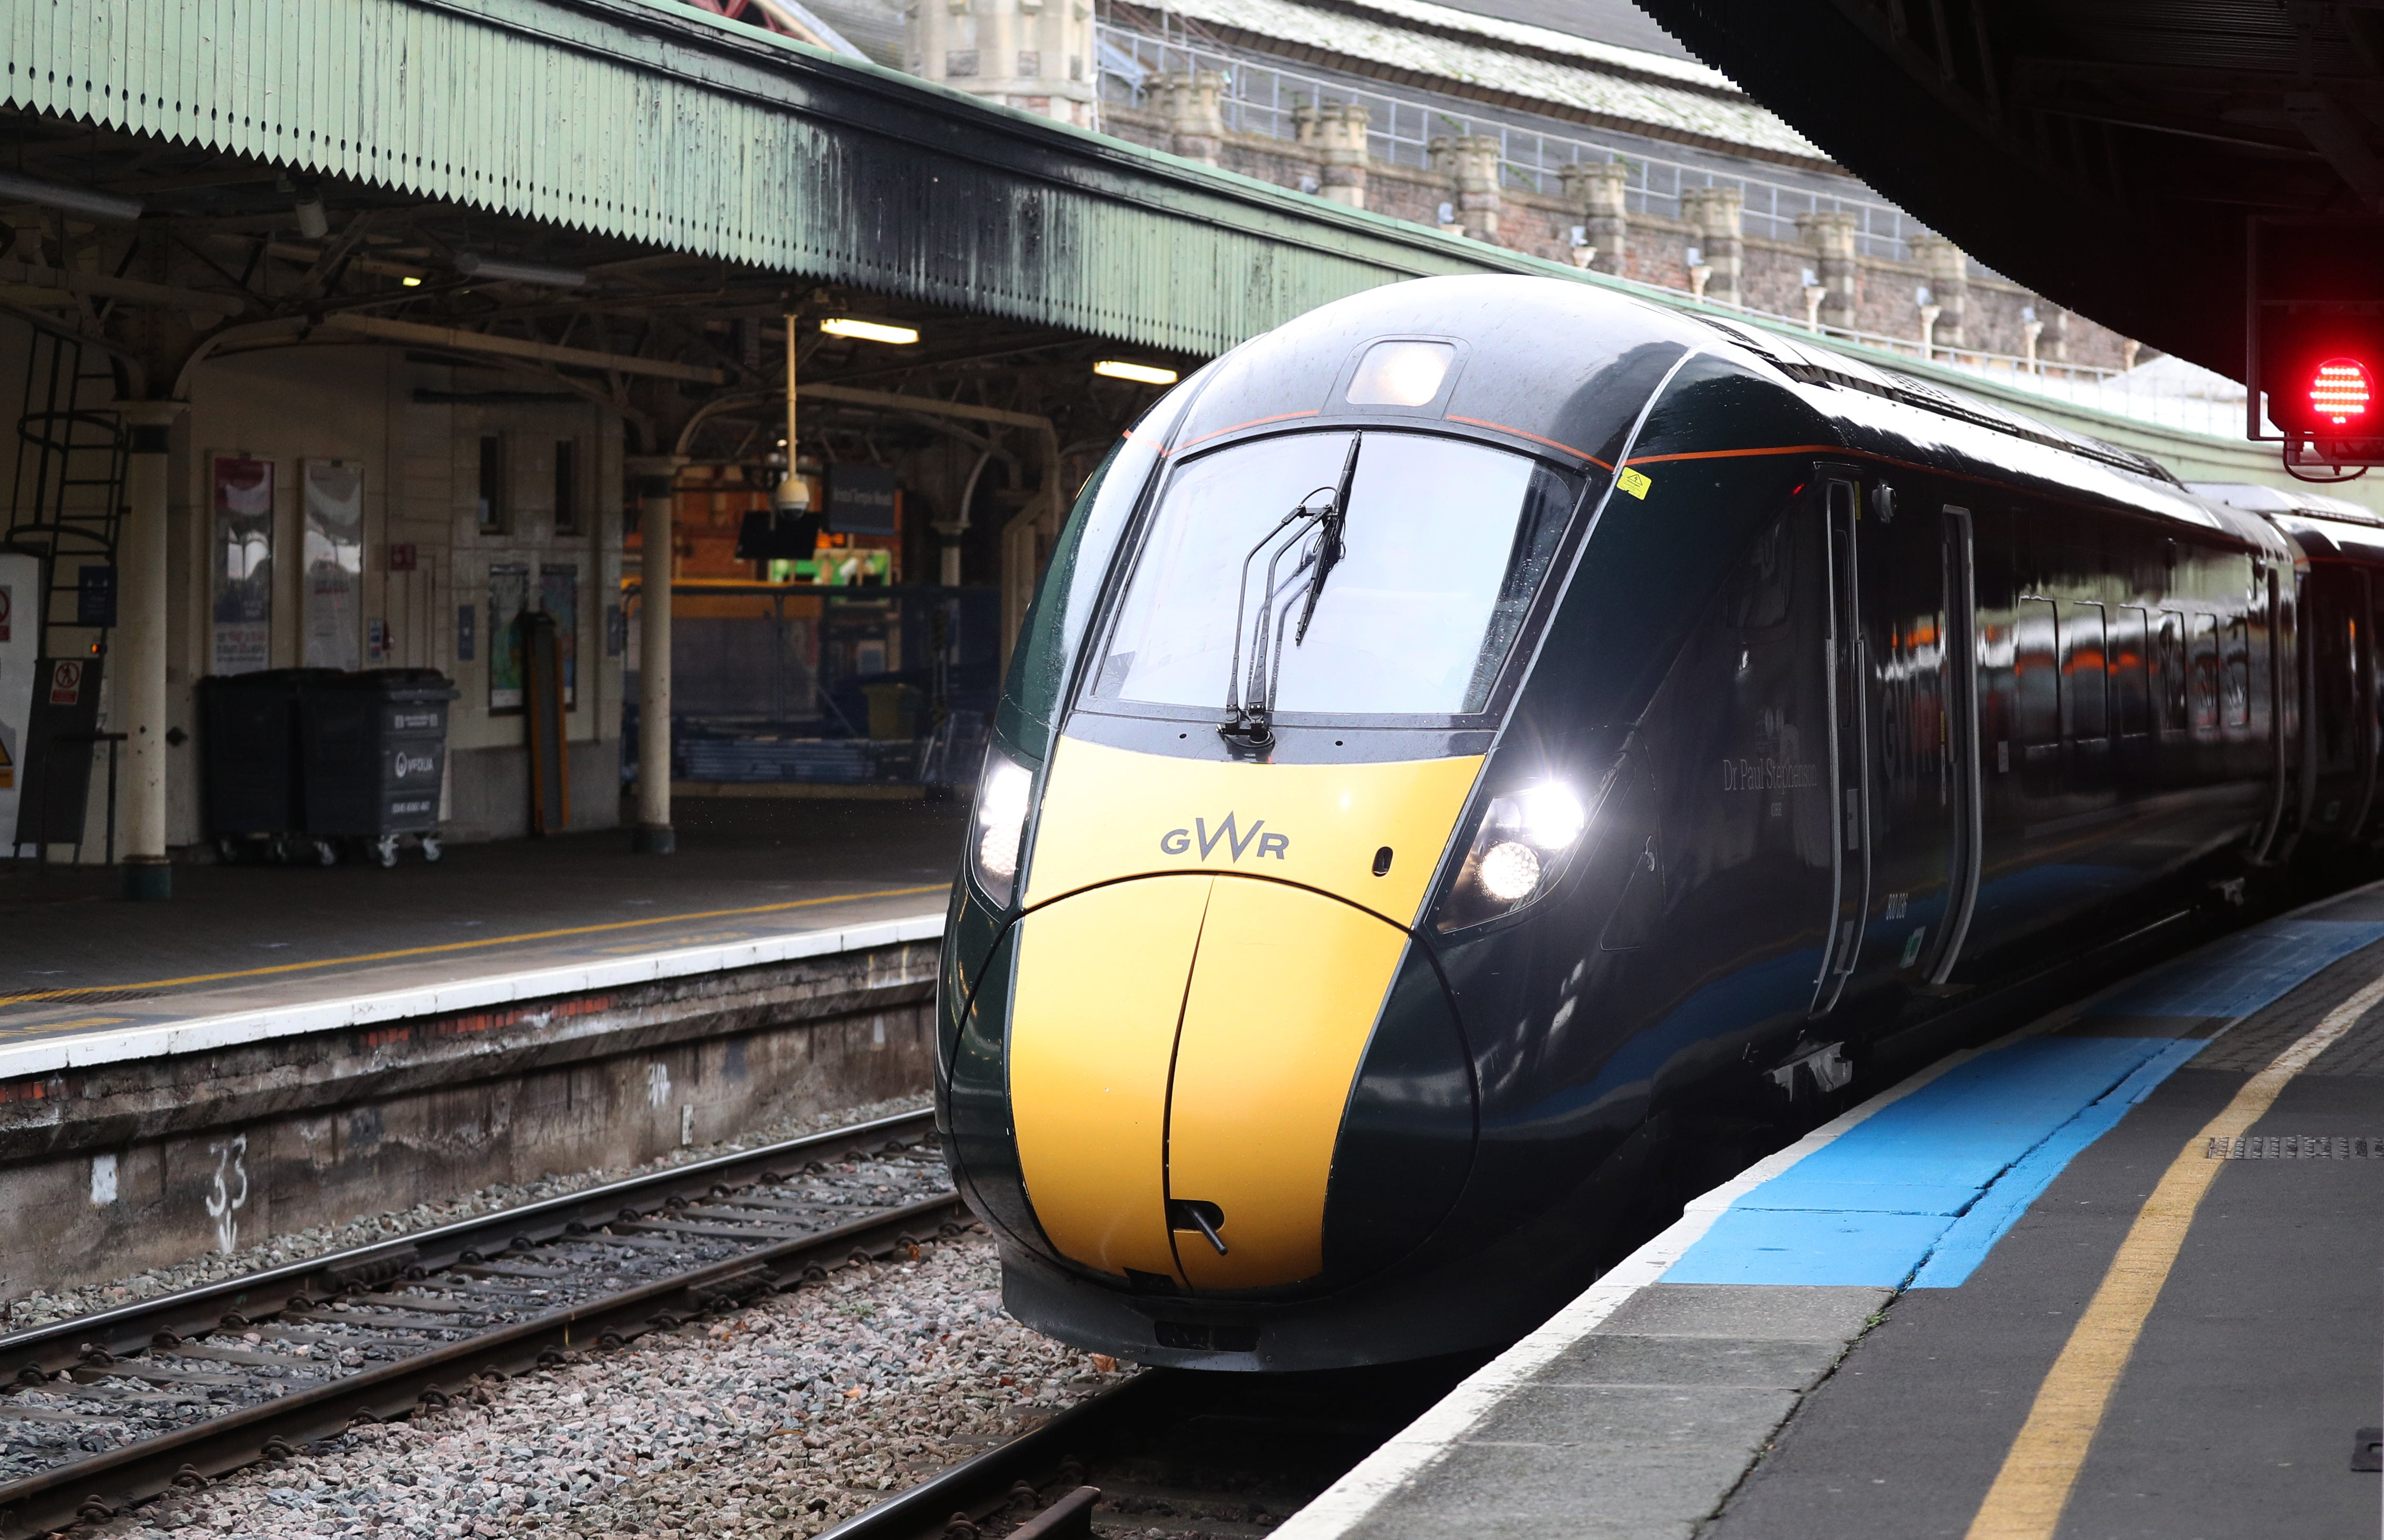 Great Western Railway services are among those impacted by the strike